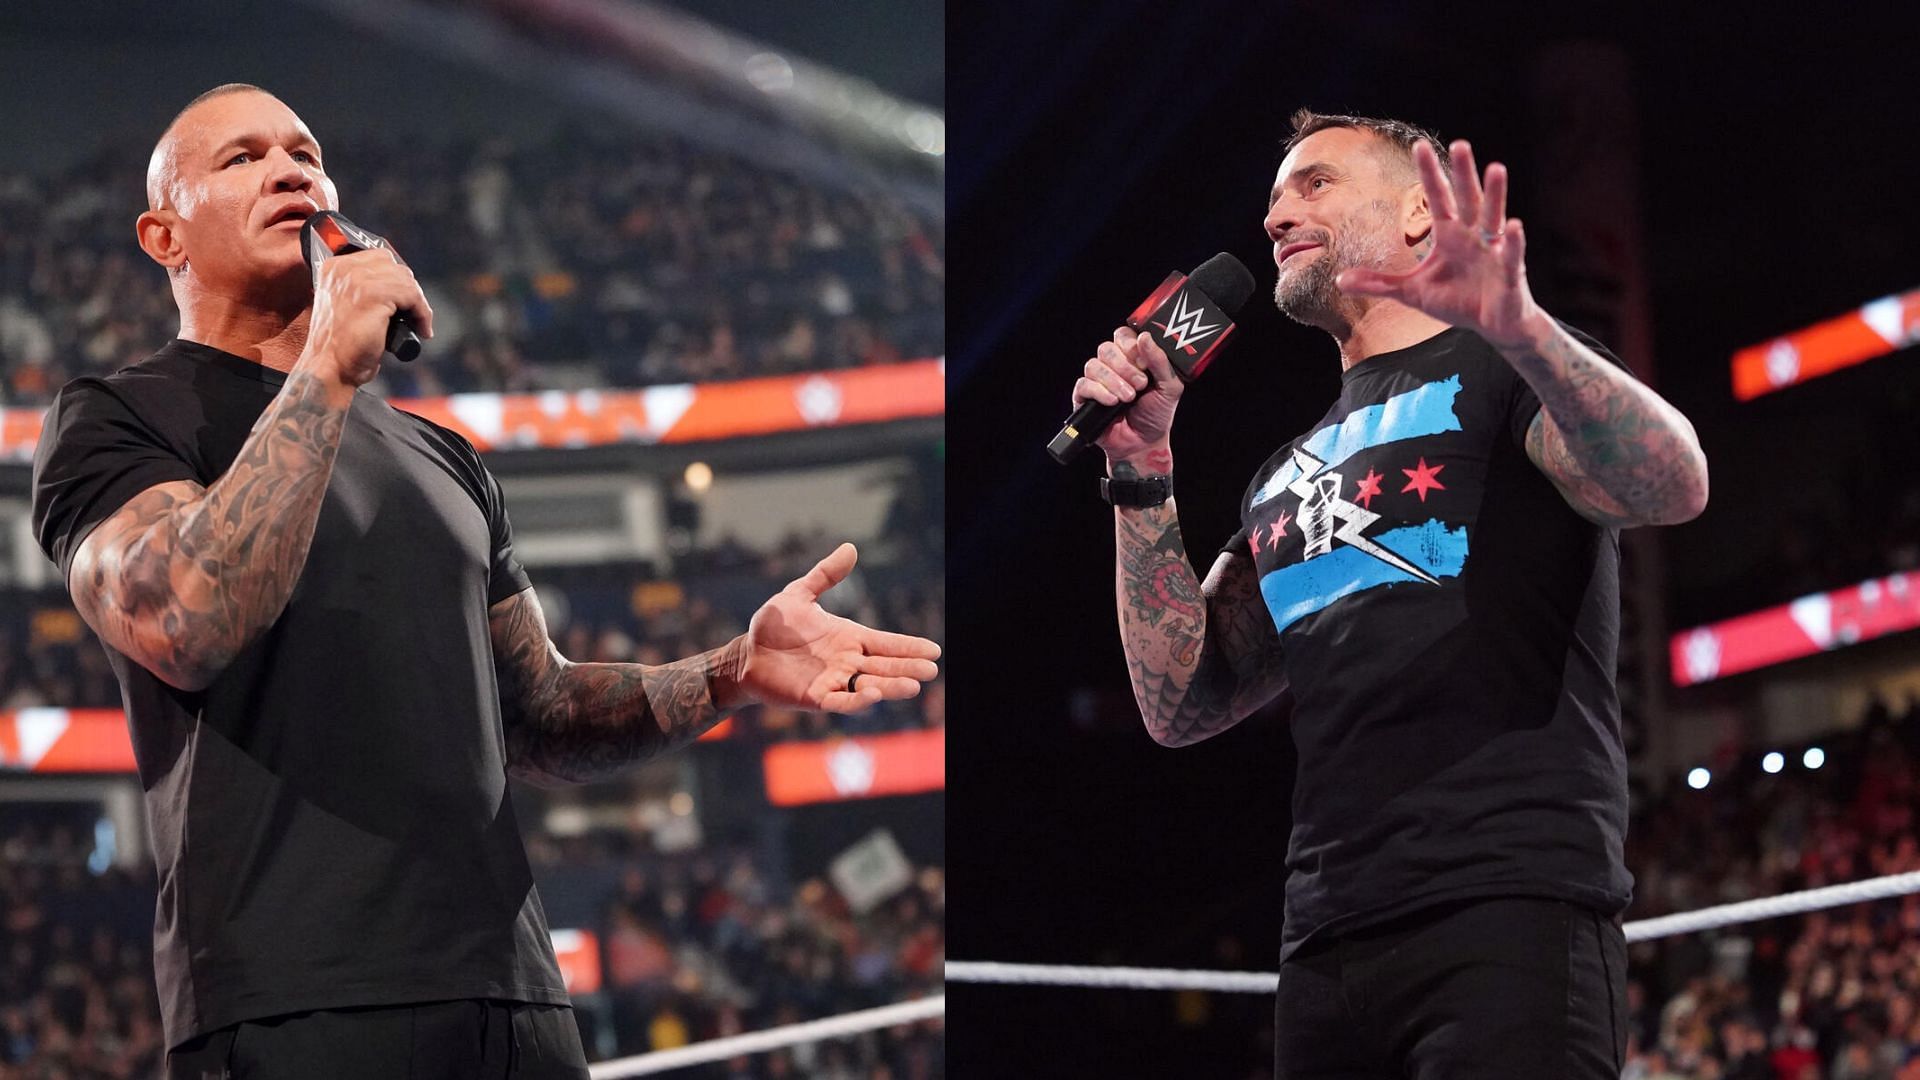 Randy Orton and CM Punk in picture